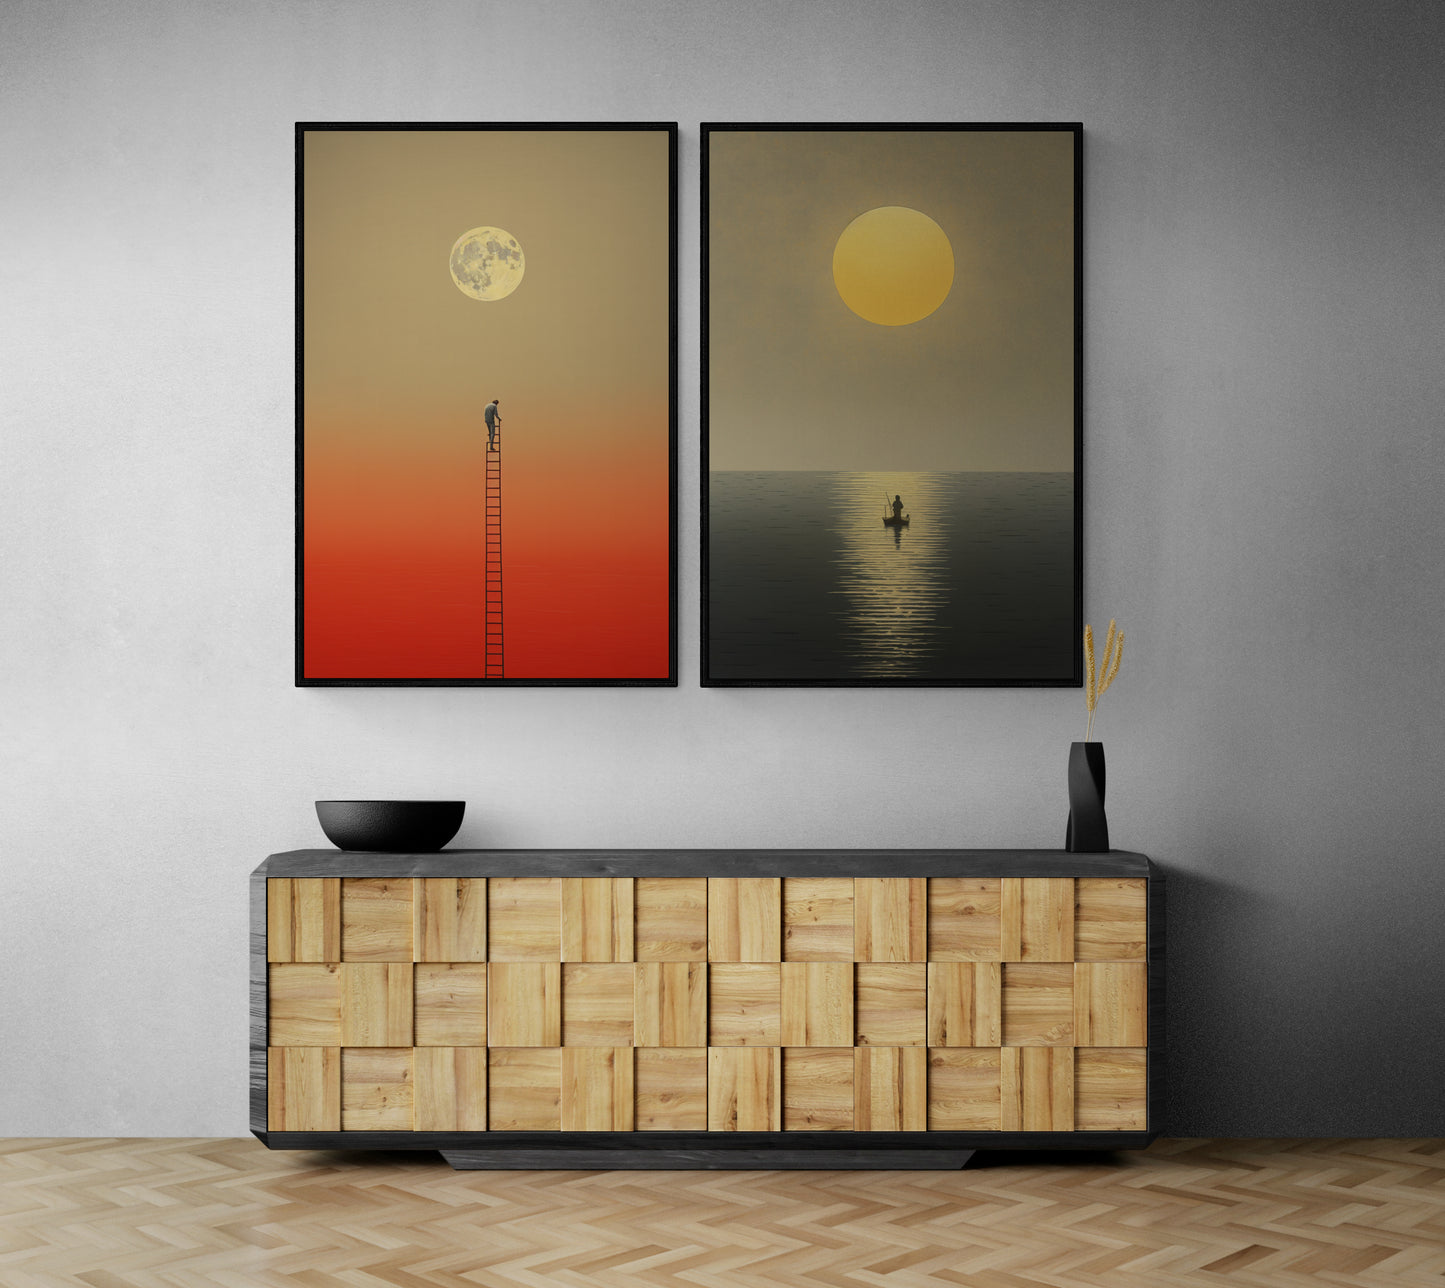 Two framed pictures of a sun and moon over water above a wooden cabinet in a modern room.